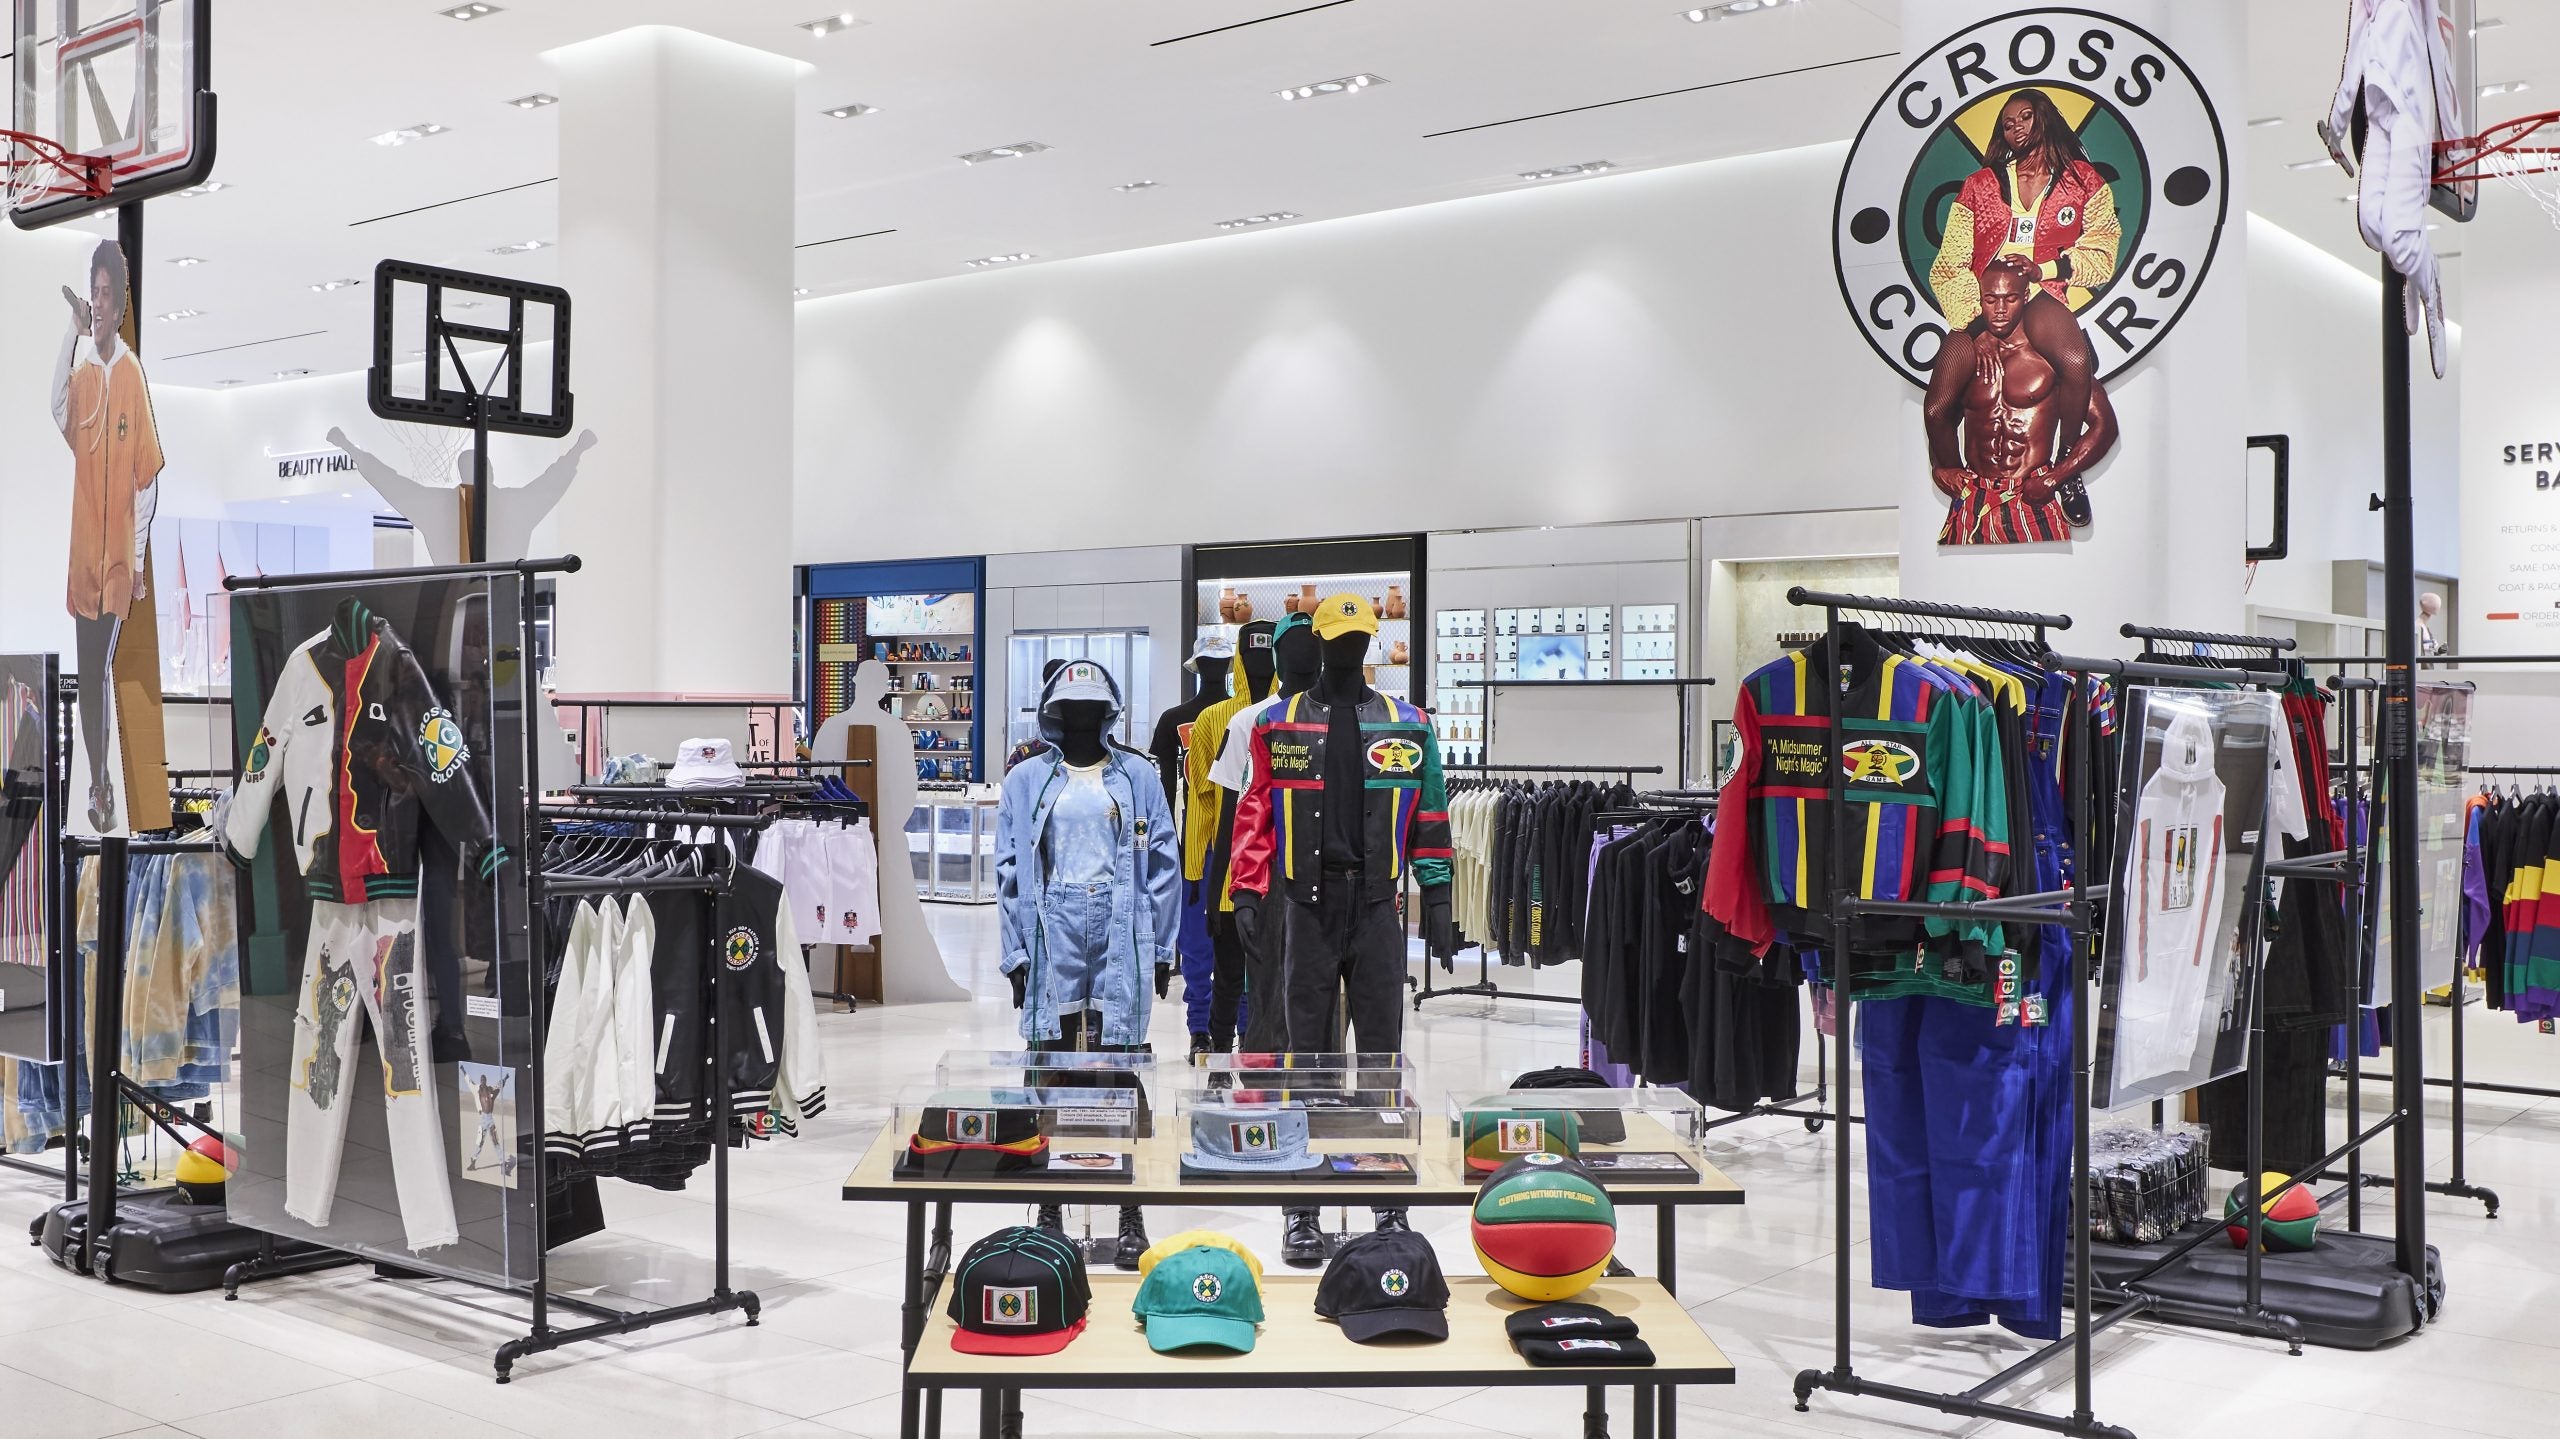 Cross Colours Brings Back Nostalgia From The ’90s At Nordstrom Flagship Stores